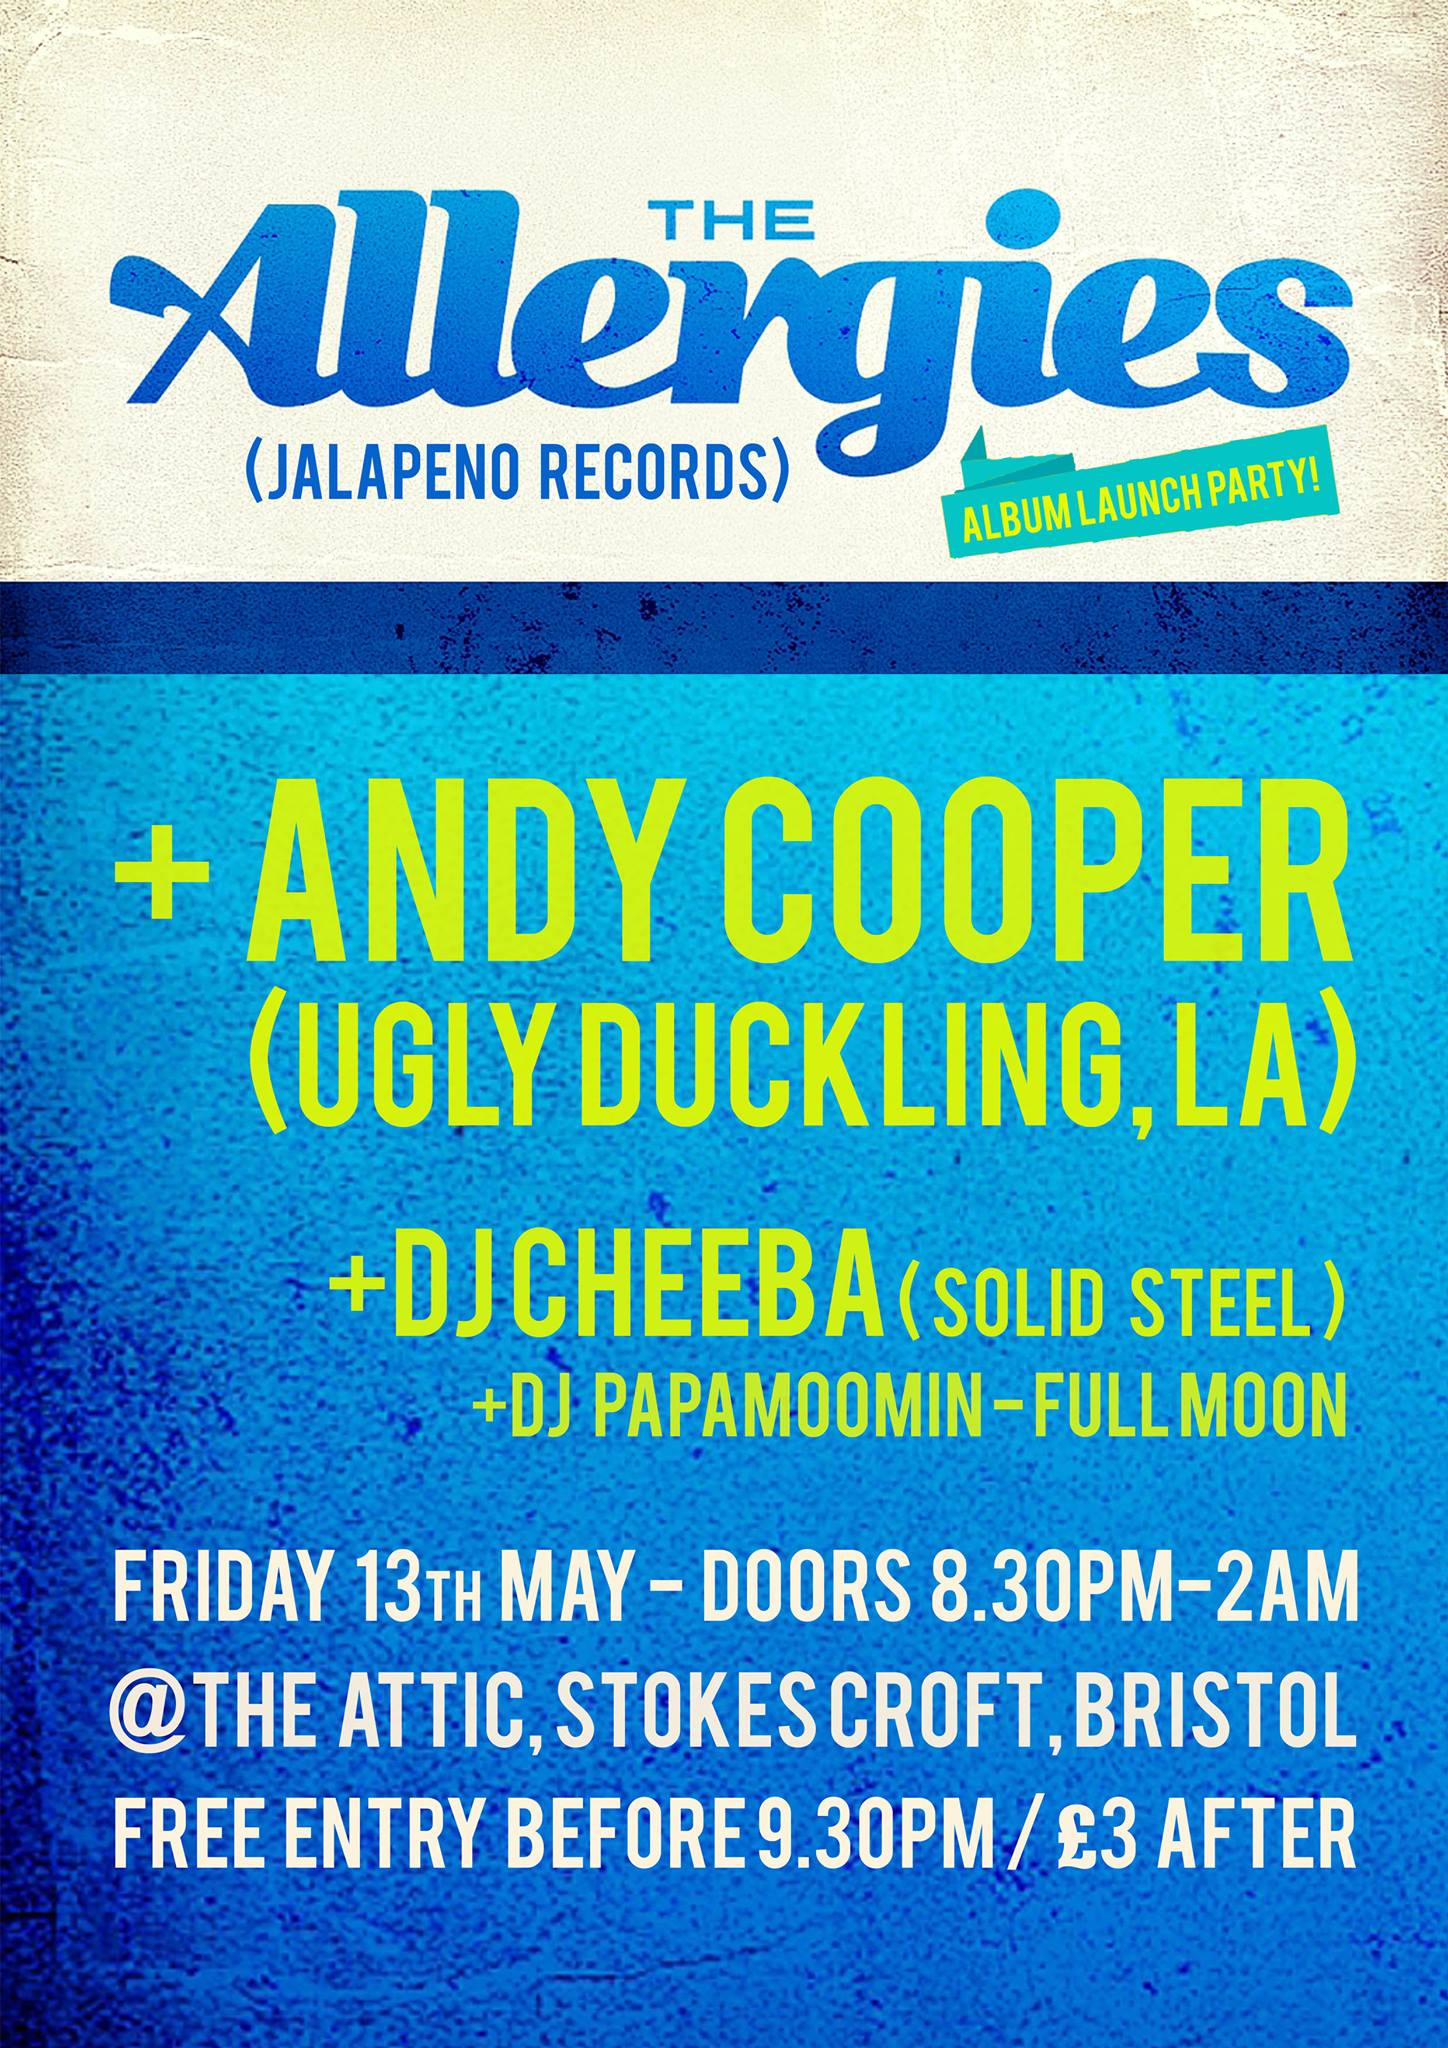 The Allergies Album Launch Party ft. Andy Cooper (Ugly Duckling, LA)